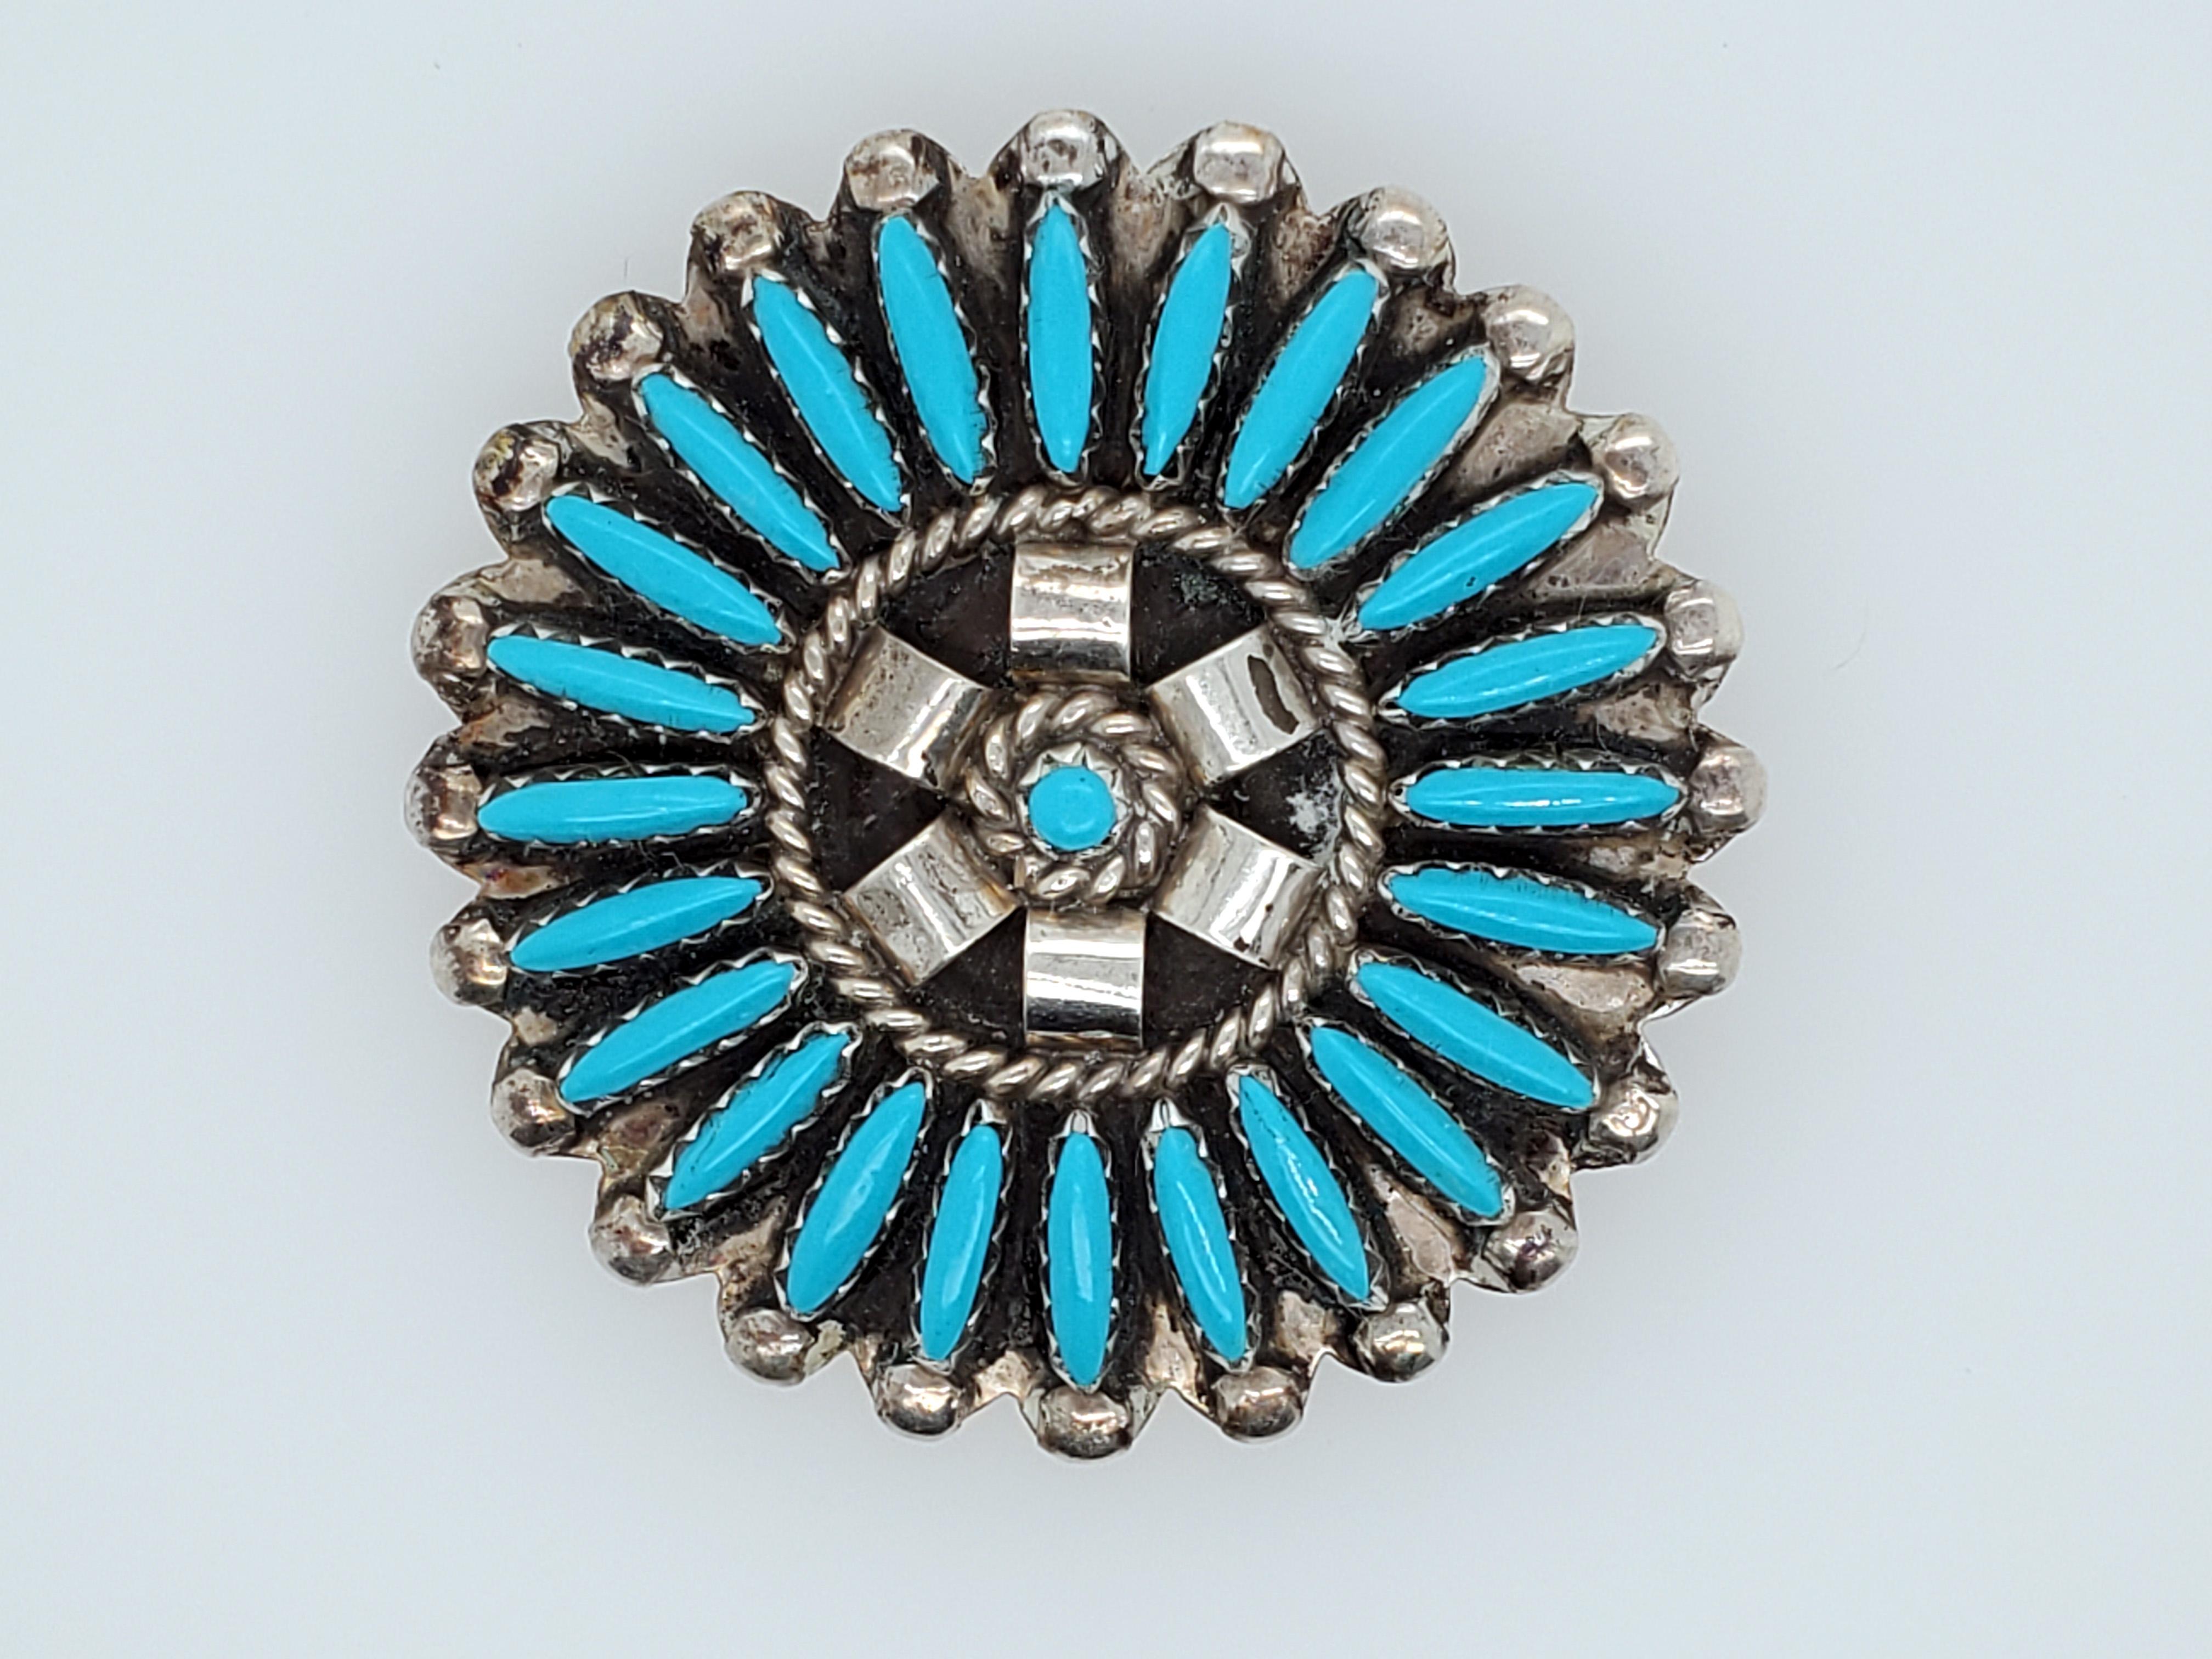 Sterling Silver with Turquoise, Zuni hand-made pin, signed by the maker - CJ. (Beautiful Vintage Needle Point Cluster, believed to be by Charlie John, well known Navajo Artist) Measures about 2 inches across. A wonderful piece found in our vaults